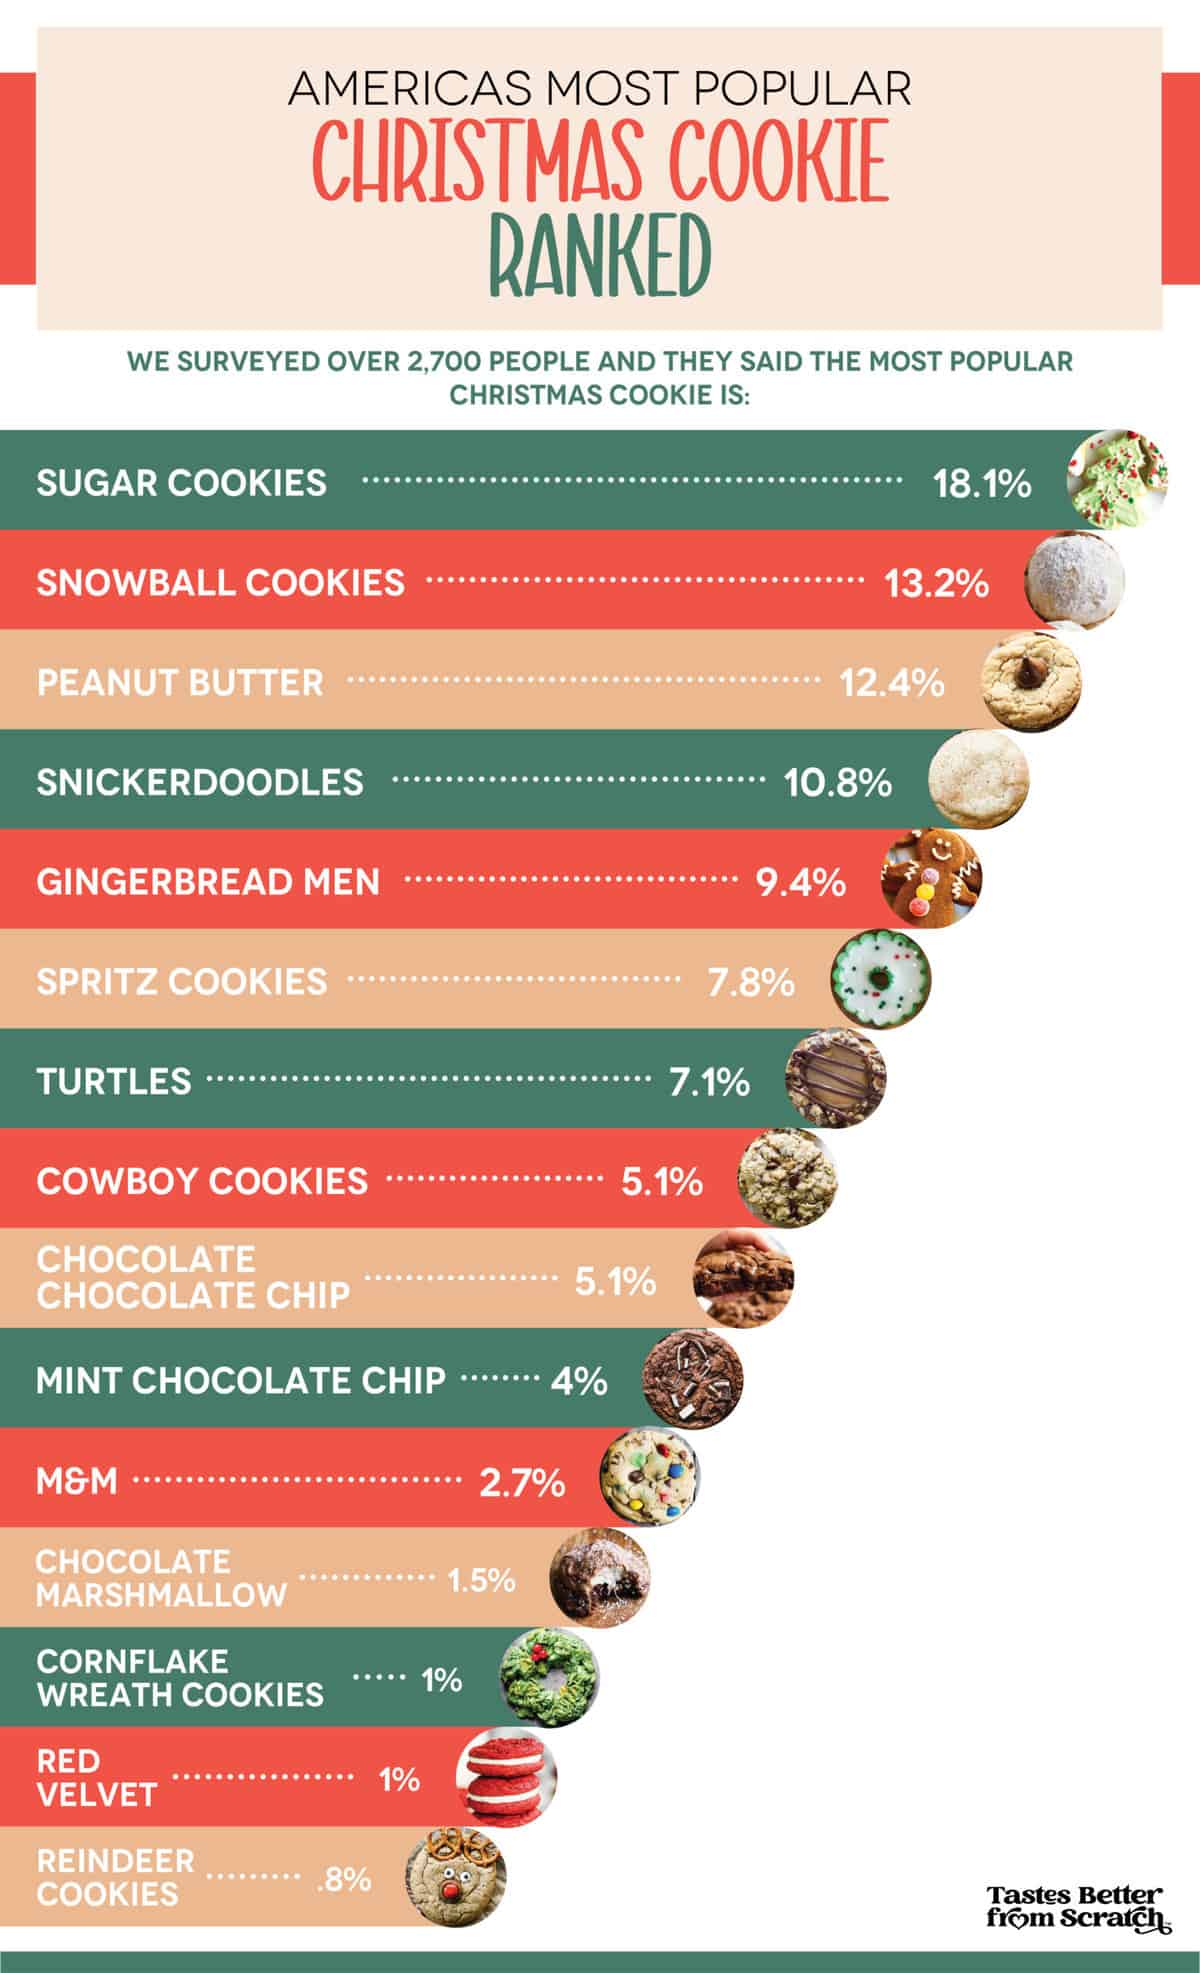 A graphic showing the results of a survey on America's most popular Christmas Cookies, shown in a horizontal bar graph.